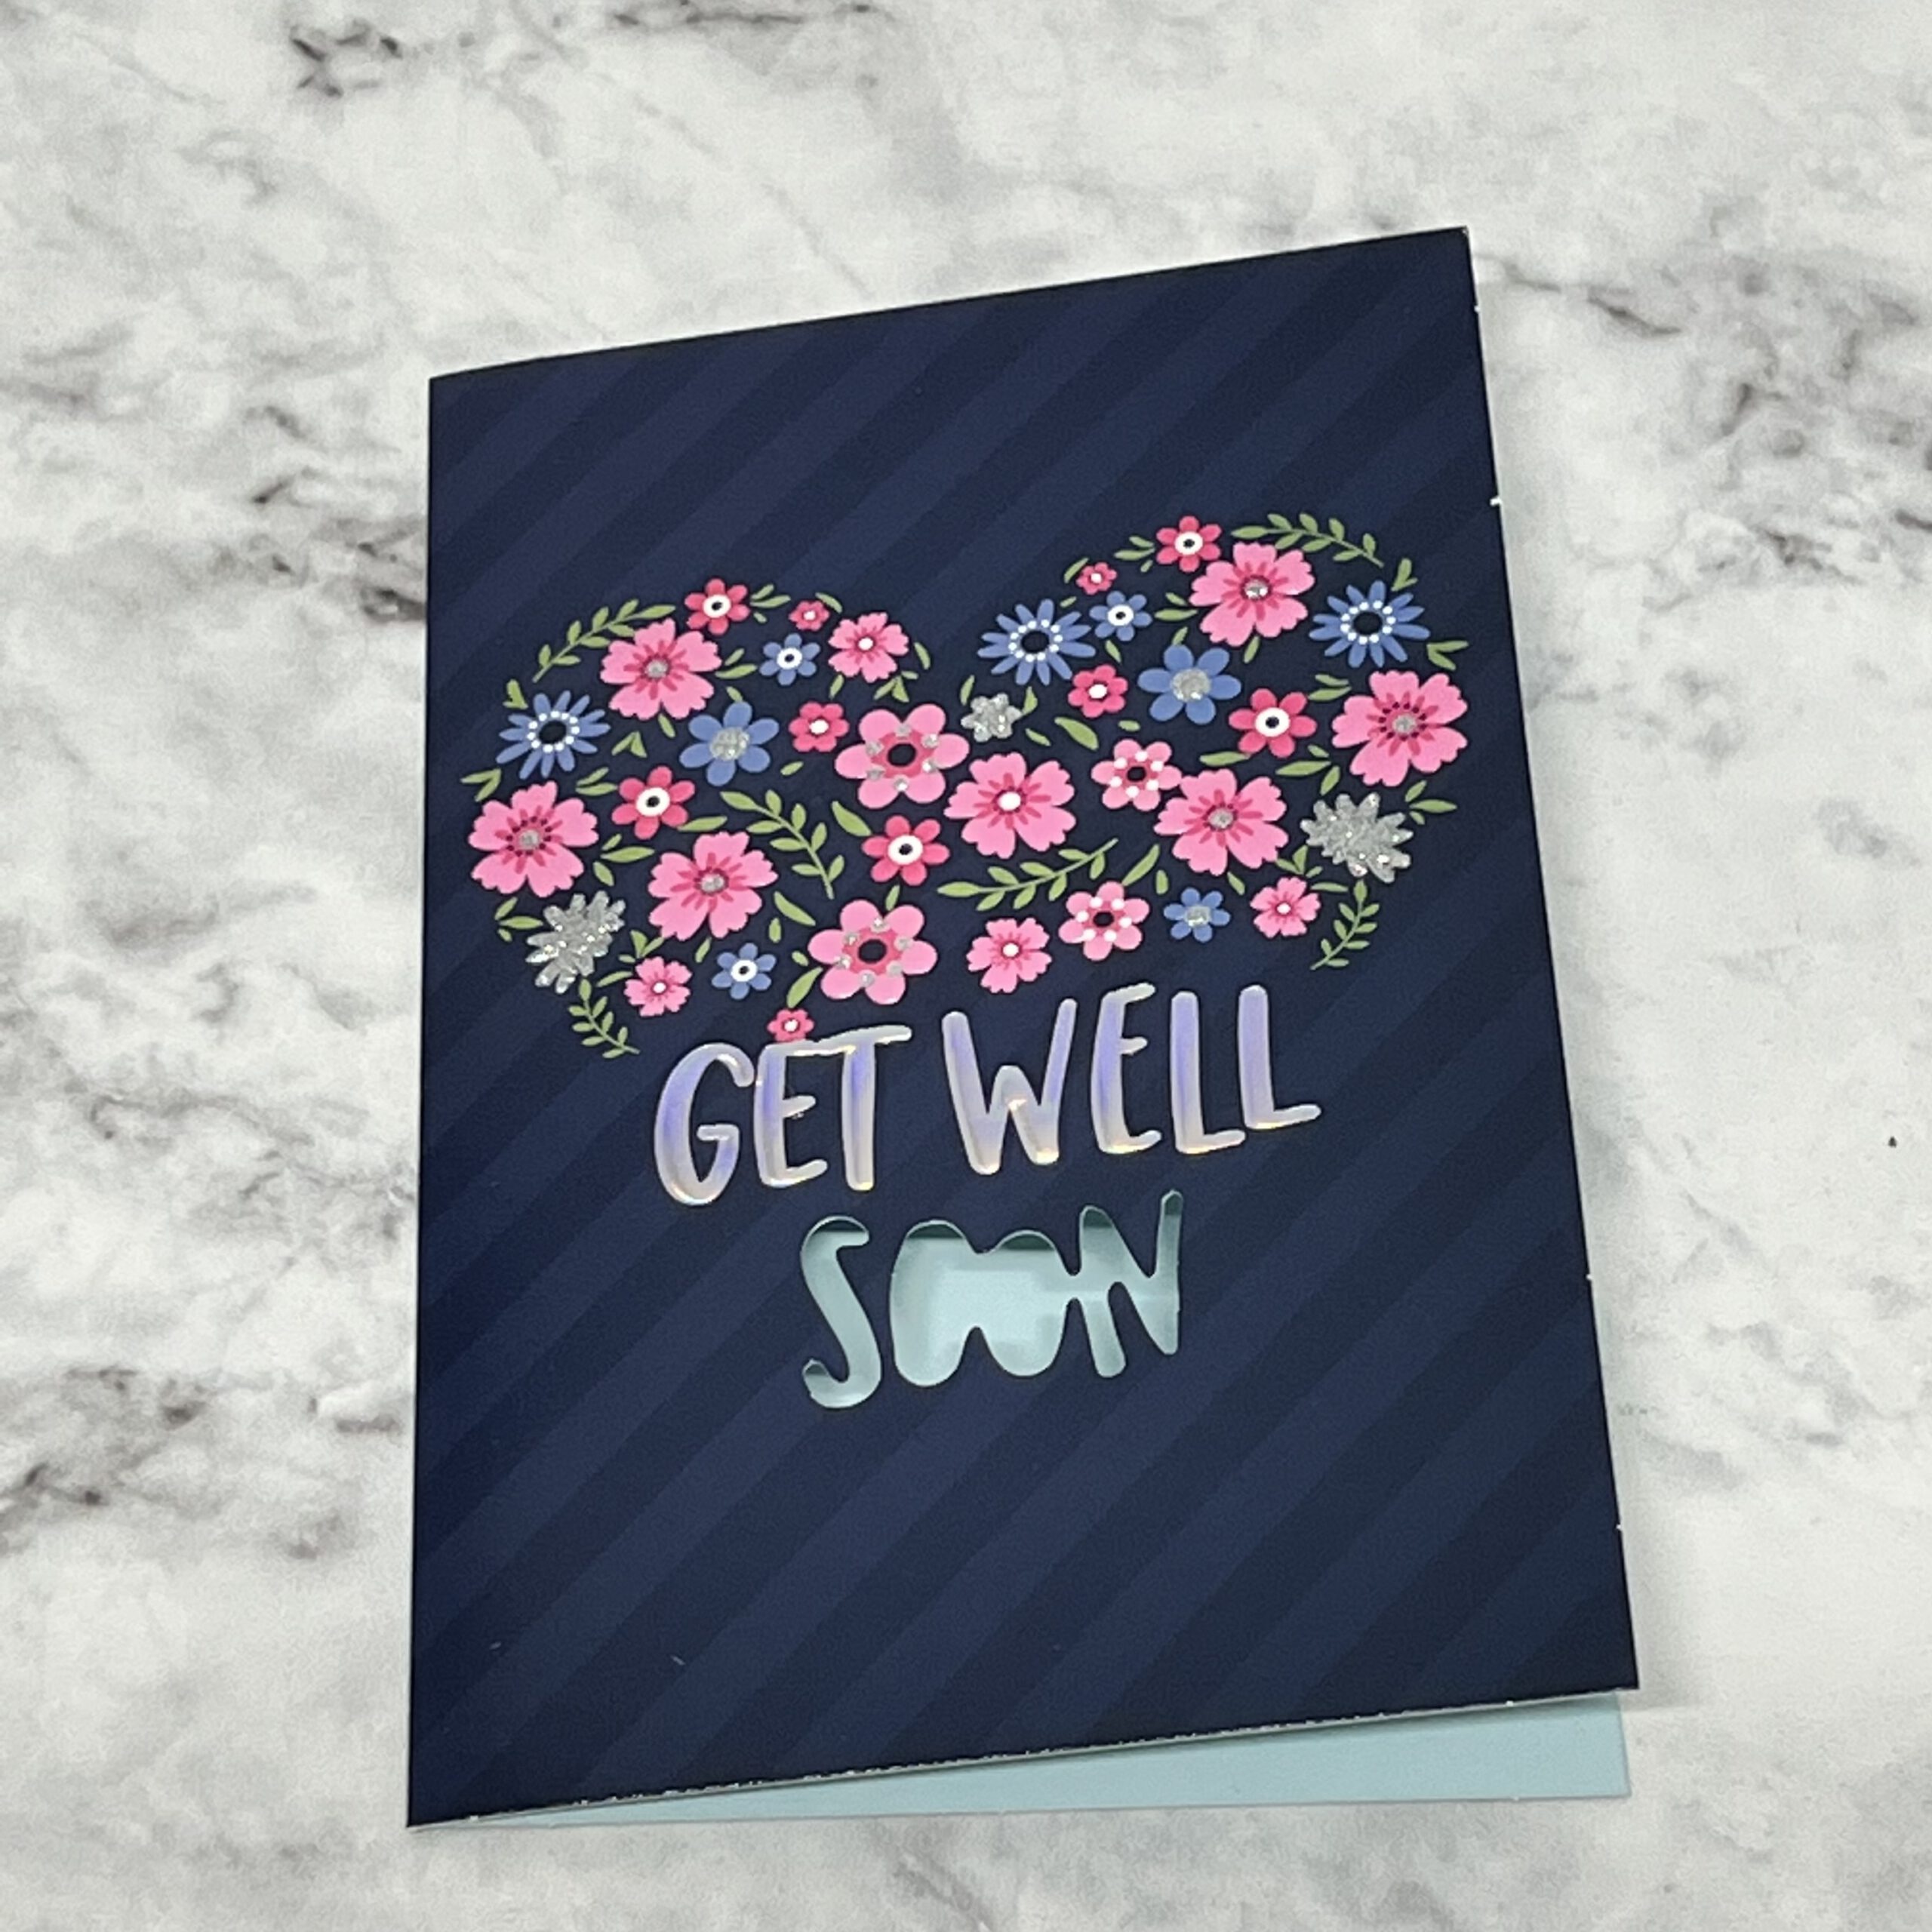 Get well soon floral heart